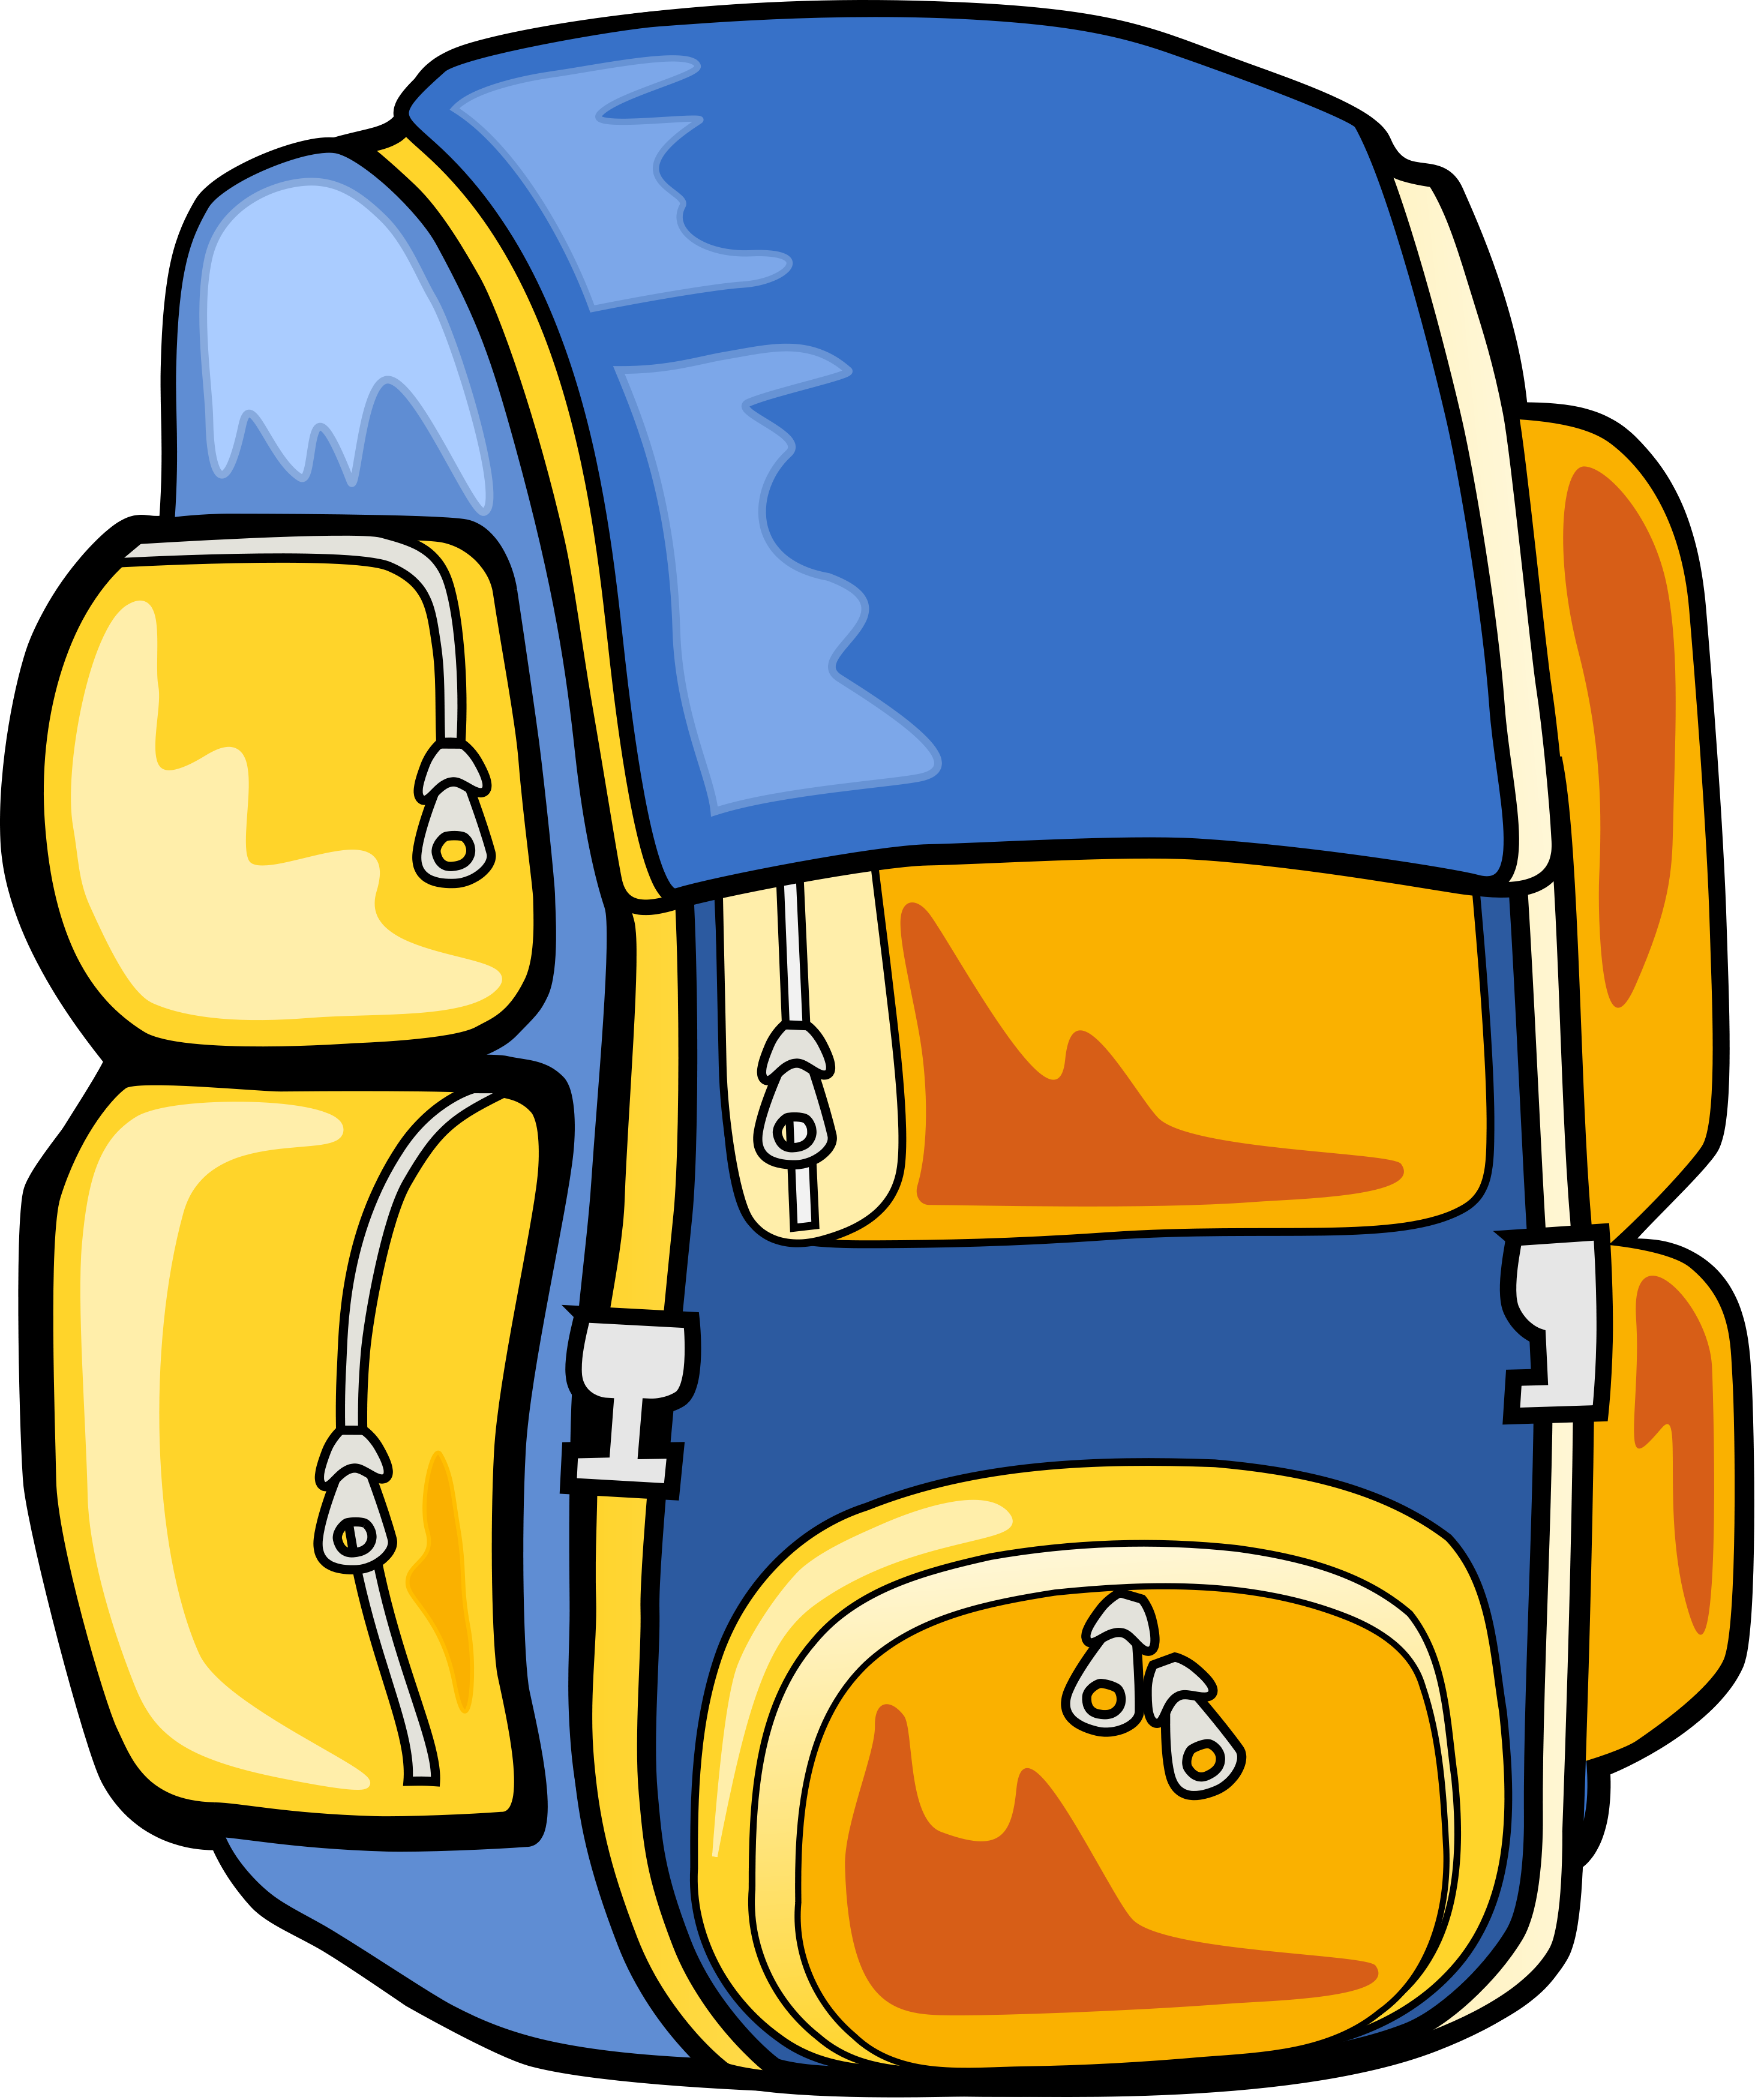 Backpack clip art library. Hiking clipart cute